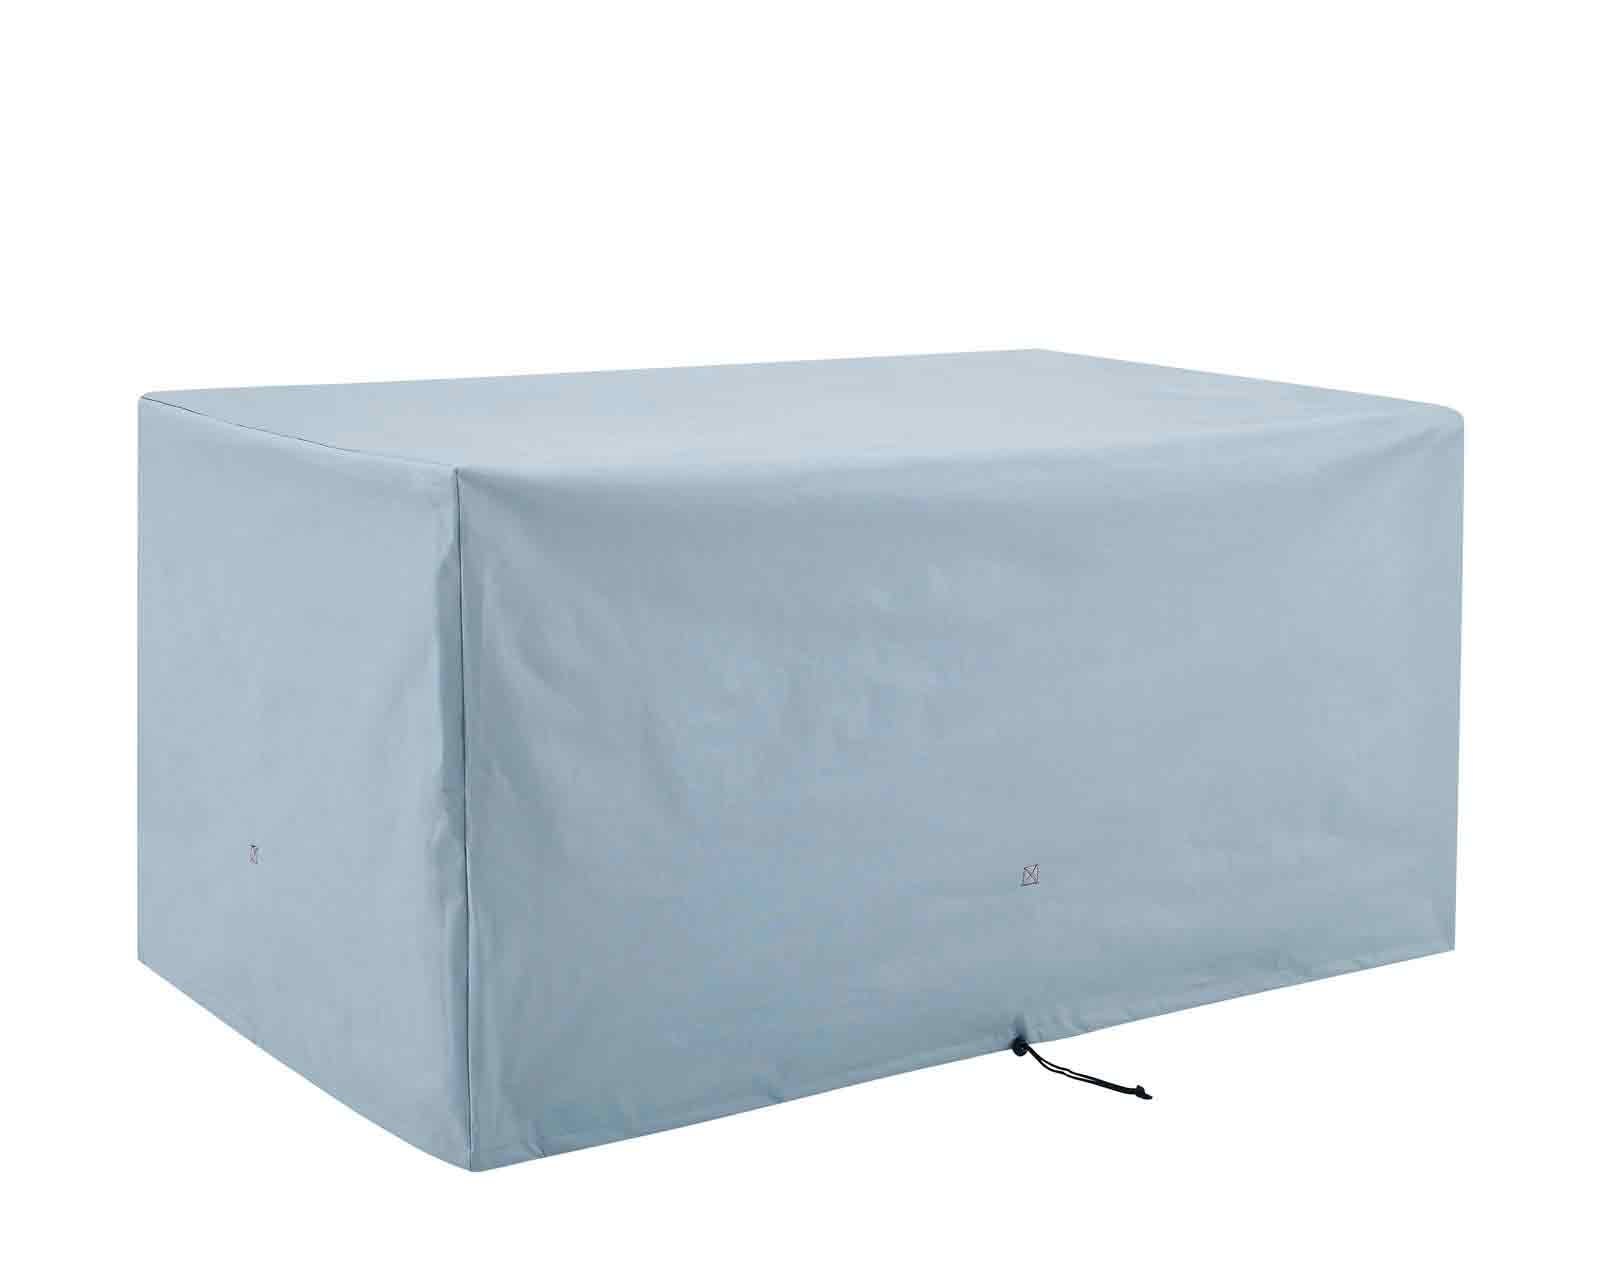 Conway Outdoor Patio Furniture Cover in Gray